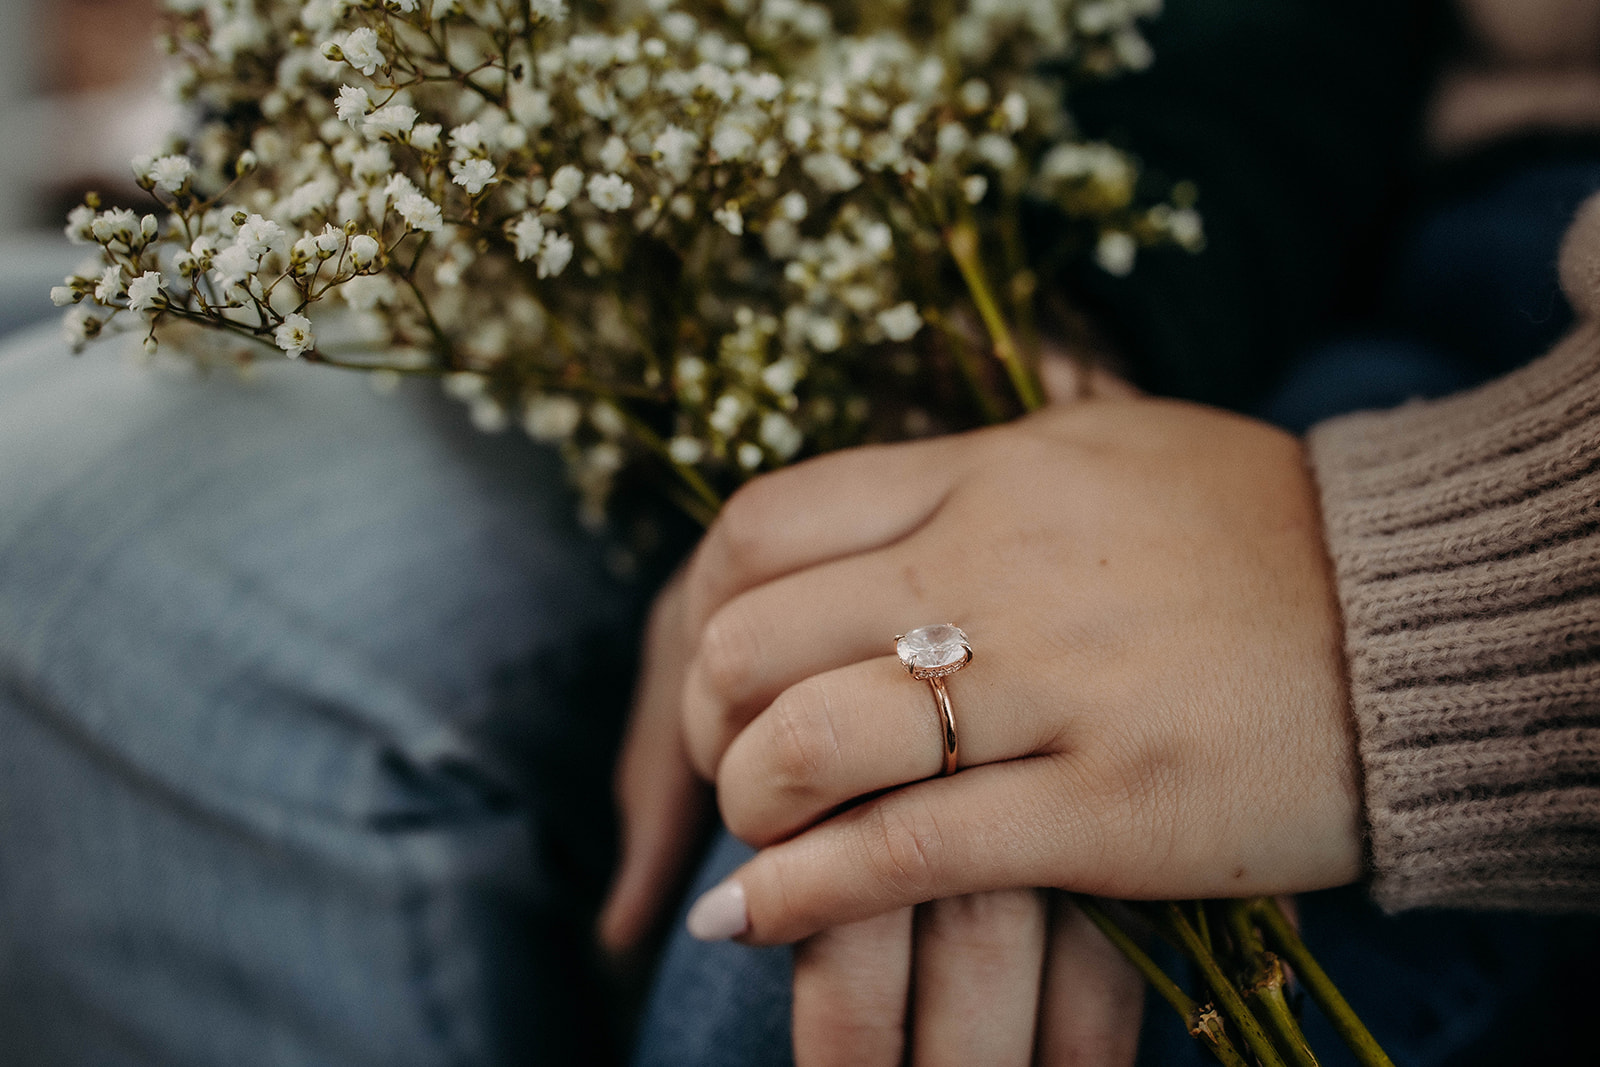 Ring and wildflowers during a stunning snowy winter engagement photoshoot